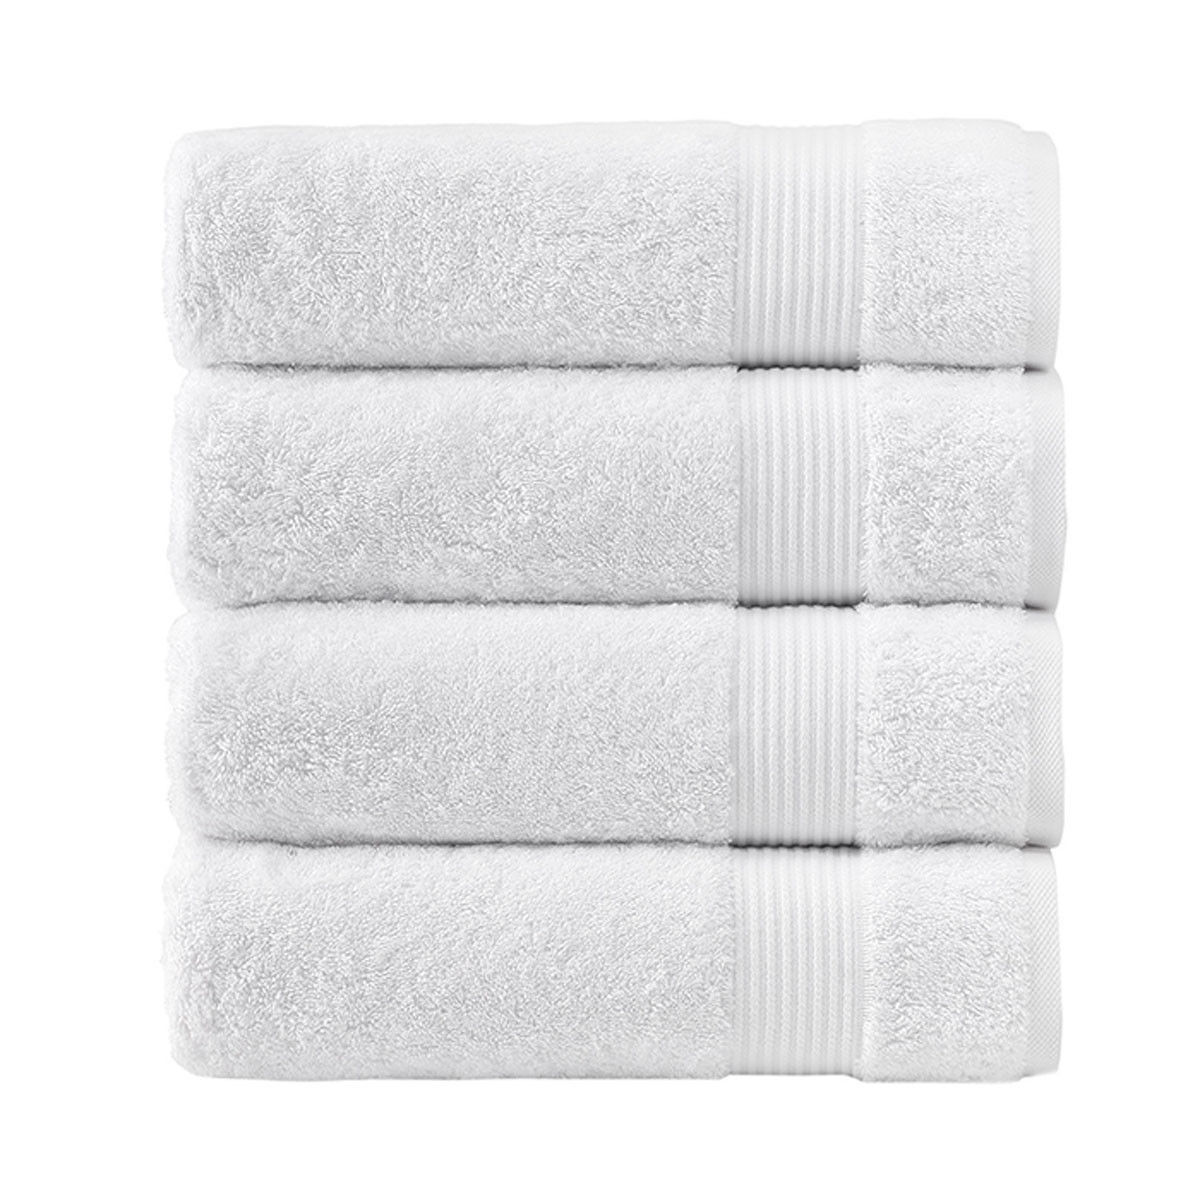 Does the Amadeus Turkish White Towel Collection, like bulk Turkish blankets, have any certifications?